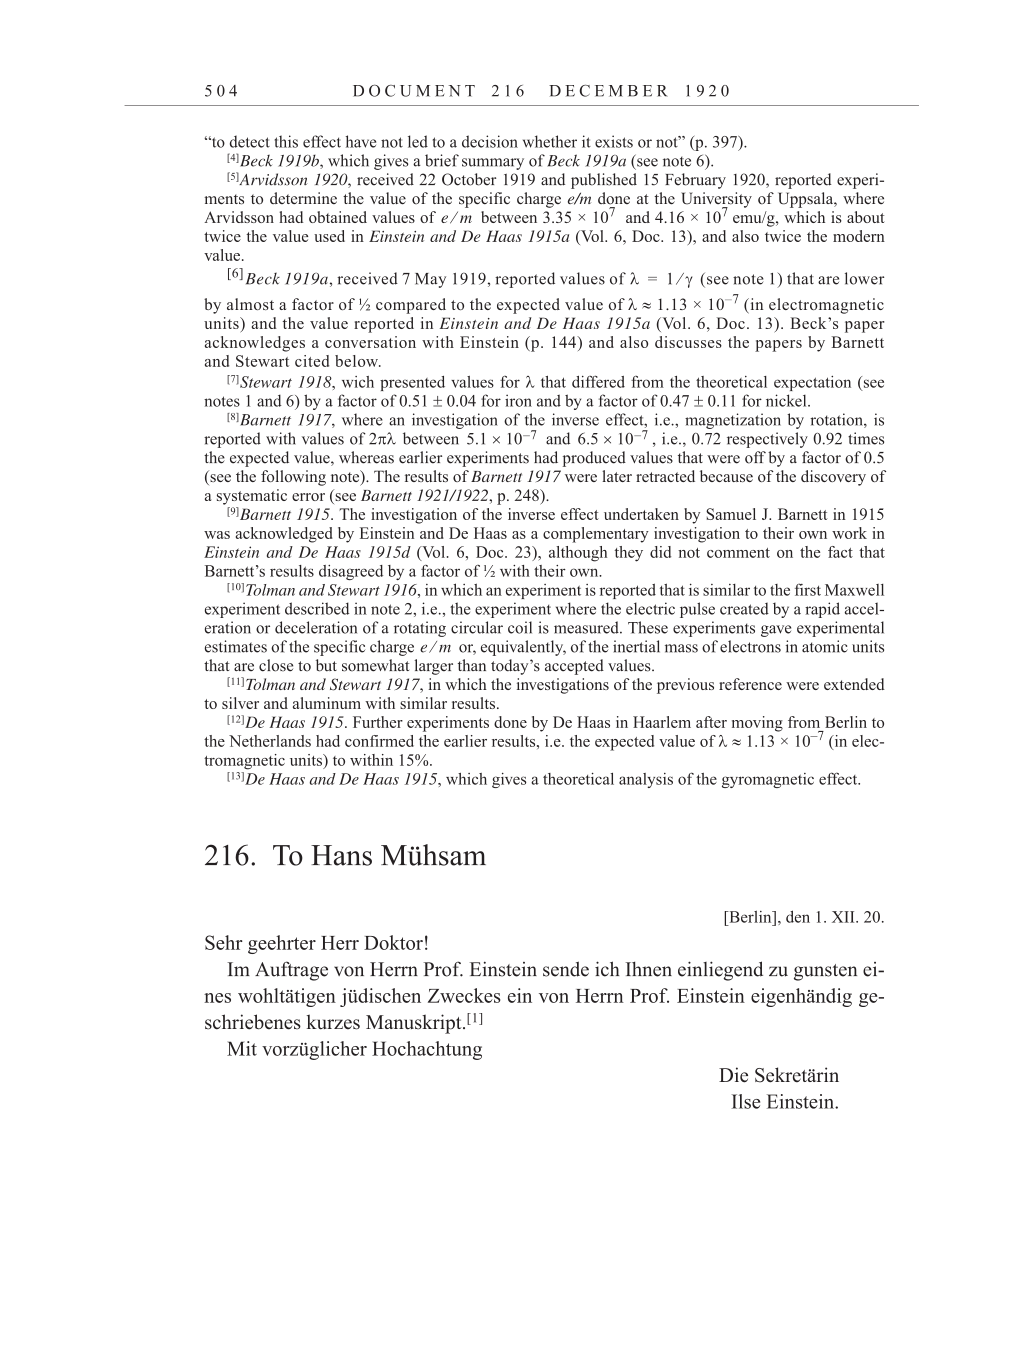 Volume 10: The Berlin Years: Correspondence May-December 1920 / Supplementary Correspondence 1909-1920 page 504